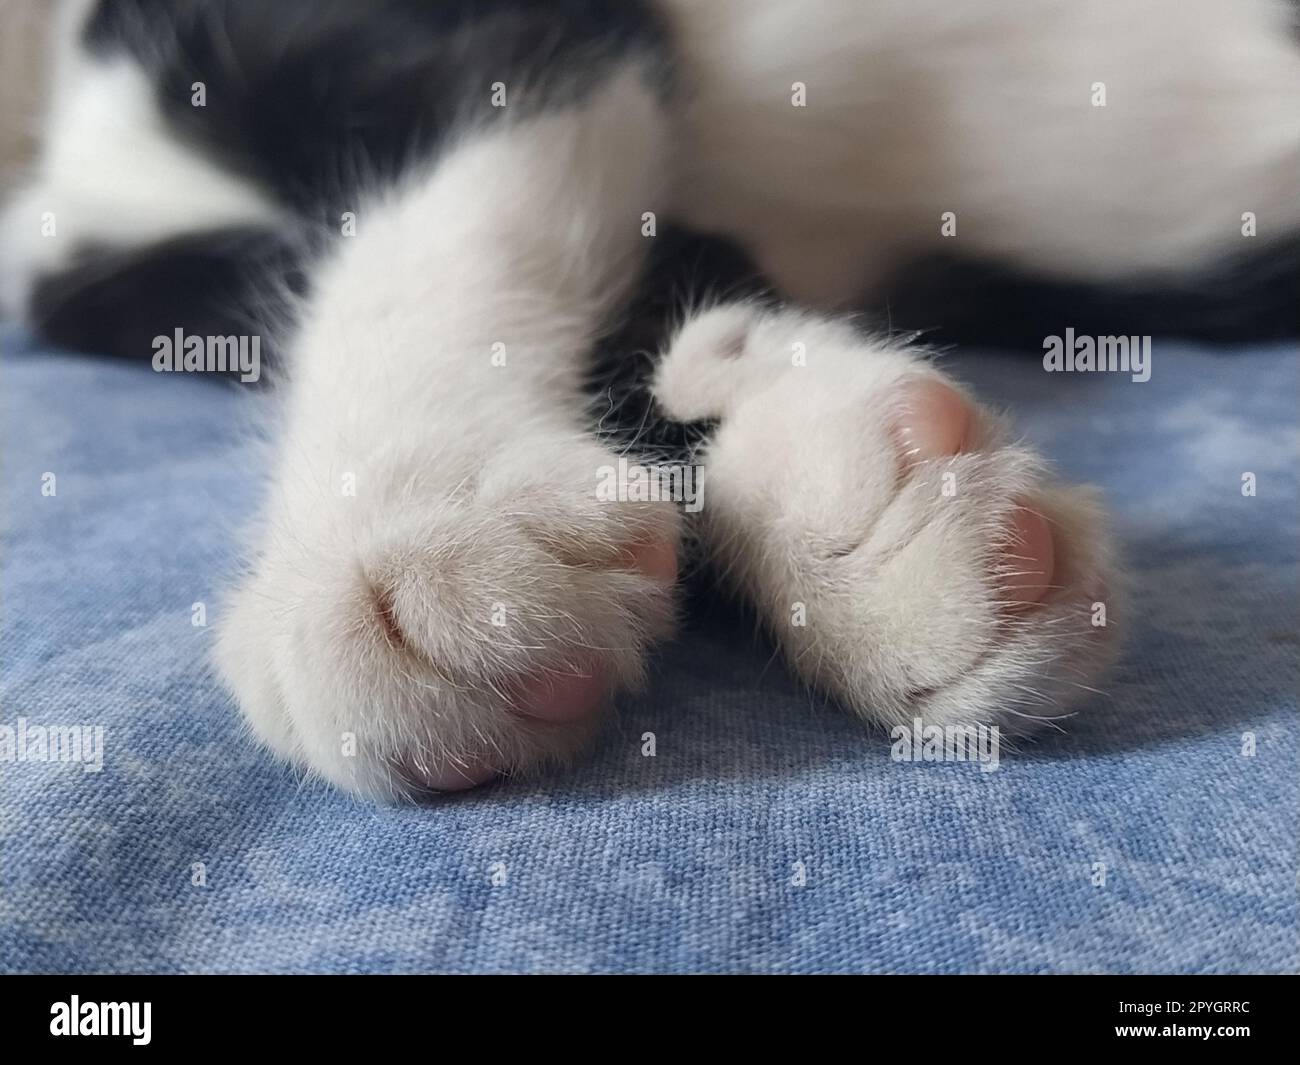 Paws of a black and white cat close up. The kitten sleeps on a blue blanket with its paws out. Photo blurred around the edges. Soft fluffy fingers and pink cat pads. Stock Photo